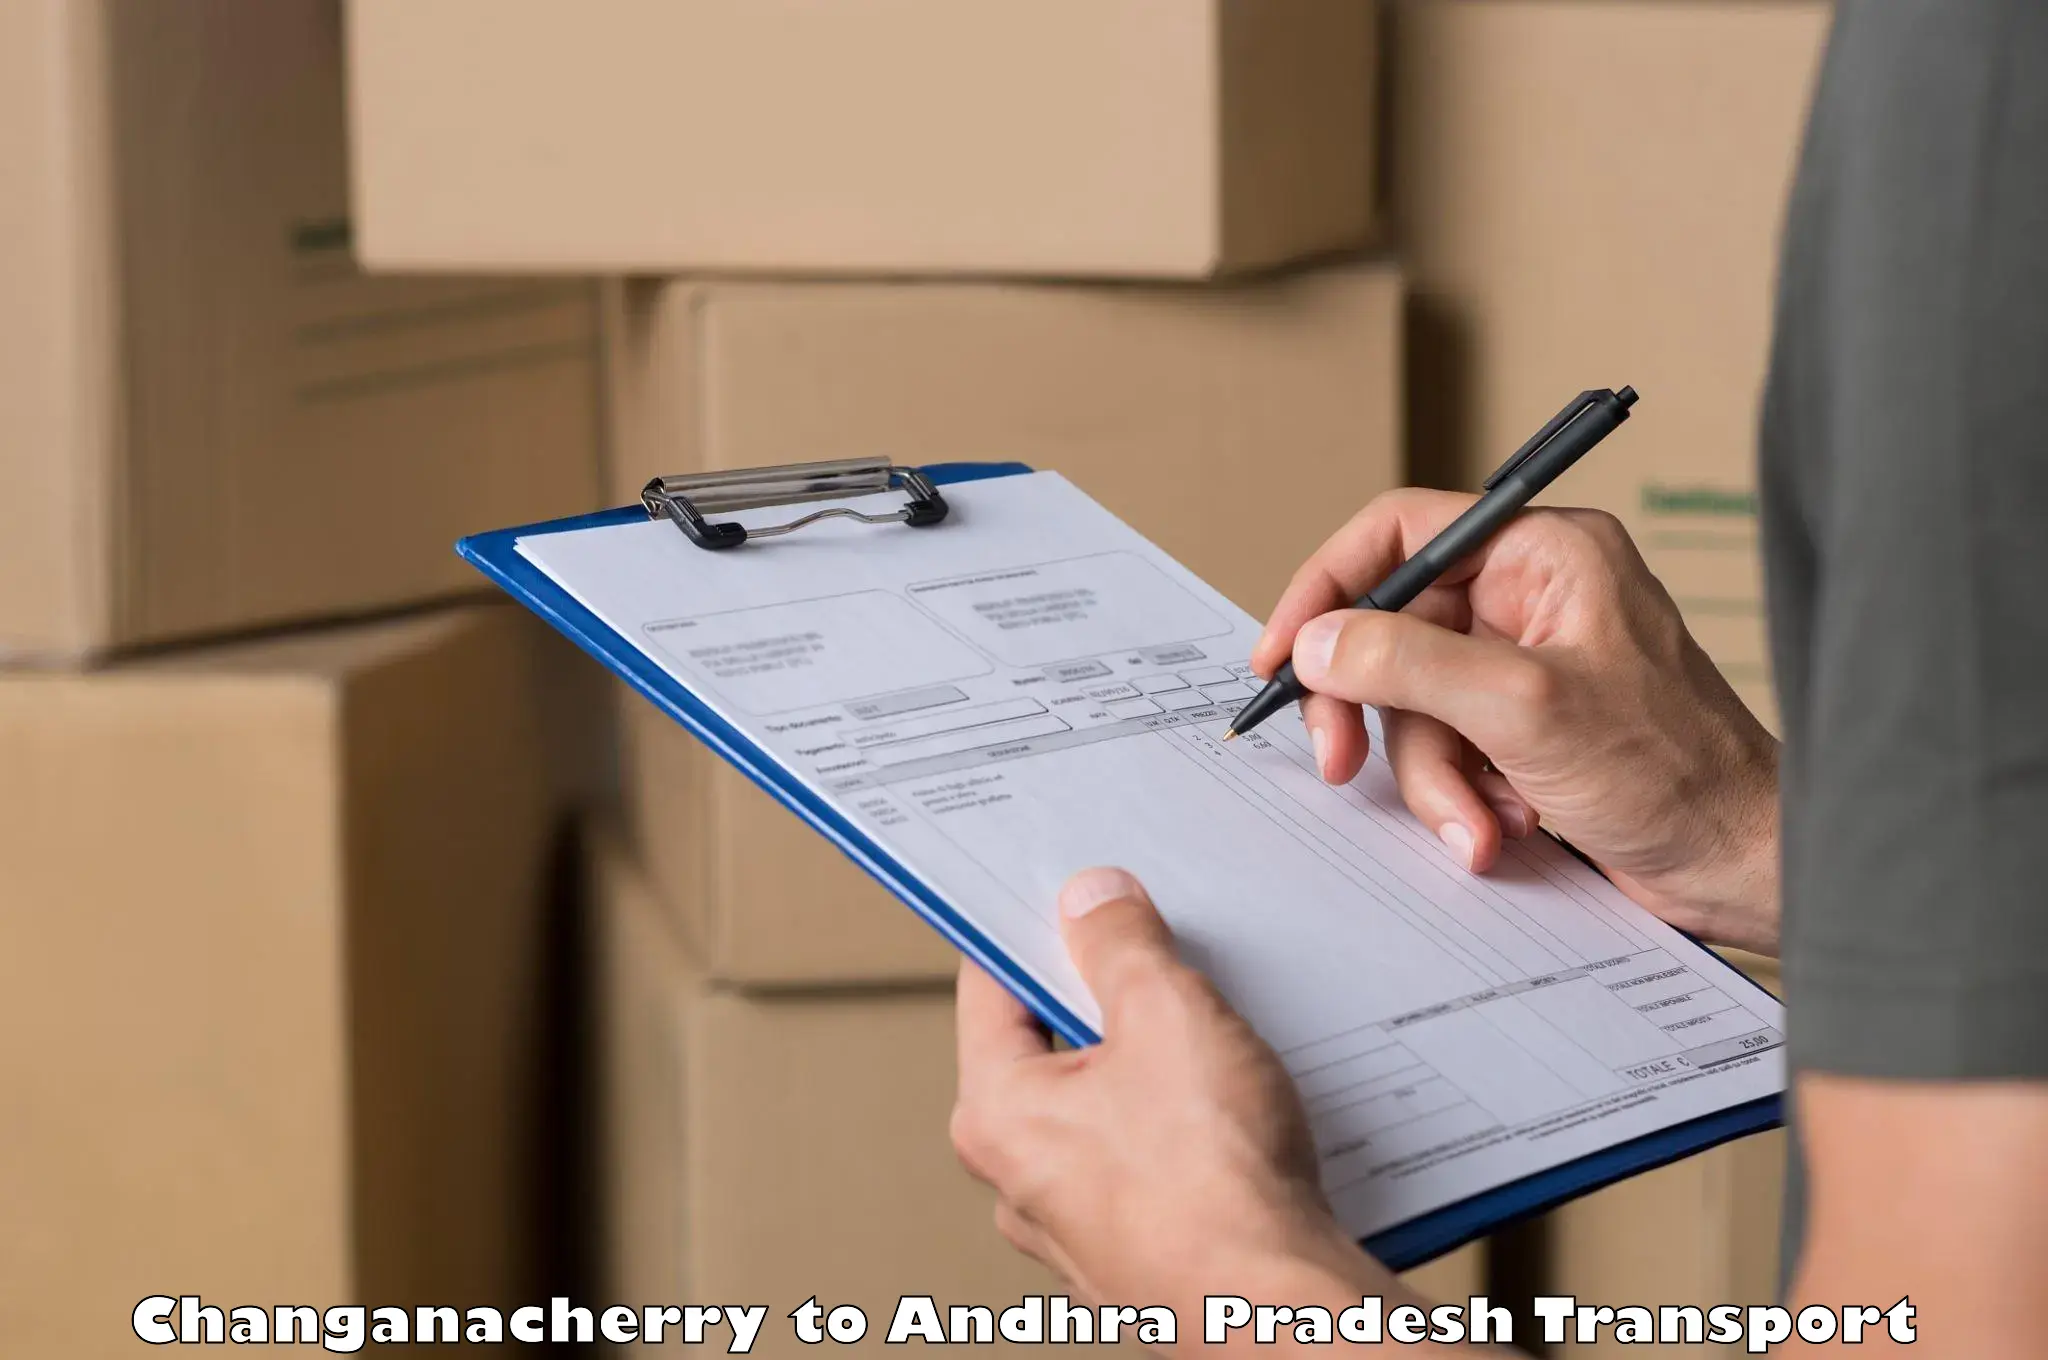 Nationwide transport services in Changanacherry to Andhra Pradesh